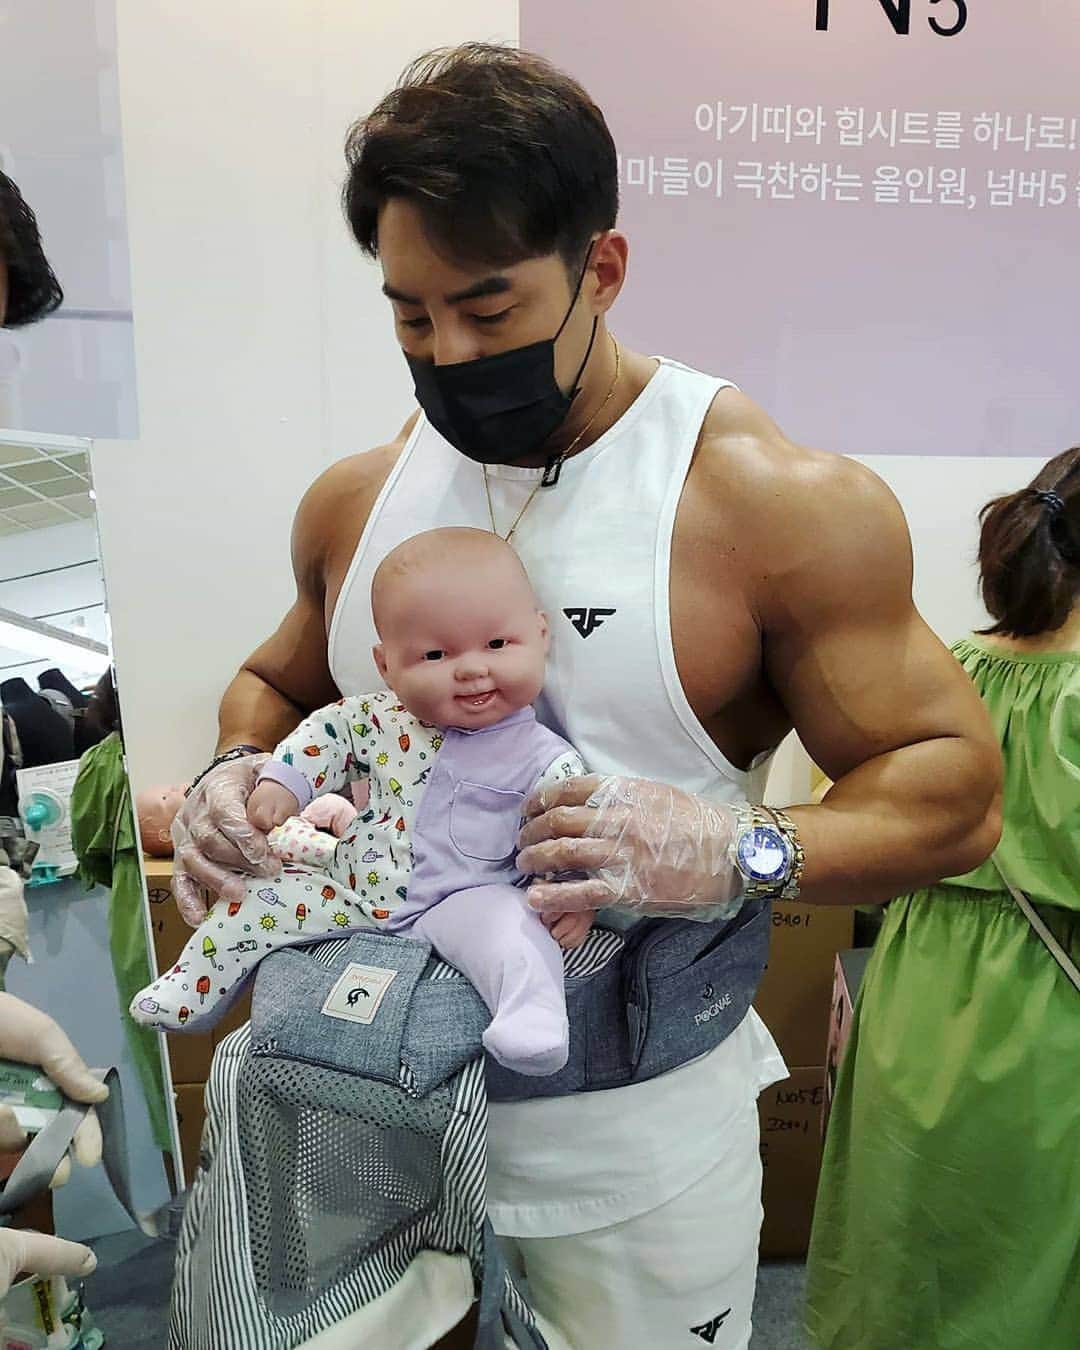 CHUL SOONのインスタグラム：「Testing the baby carrier  Any fathers out there?  #newfather #babycarrier #babyboynames  #babiesfashion #chulsoon2022 #bodyweightworkout #bodyimage #koreandaddy #newdad #newfather #marriage #traininsane #chulsoon #teamchuls #happydaddy」